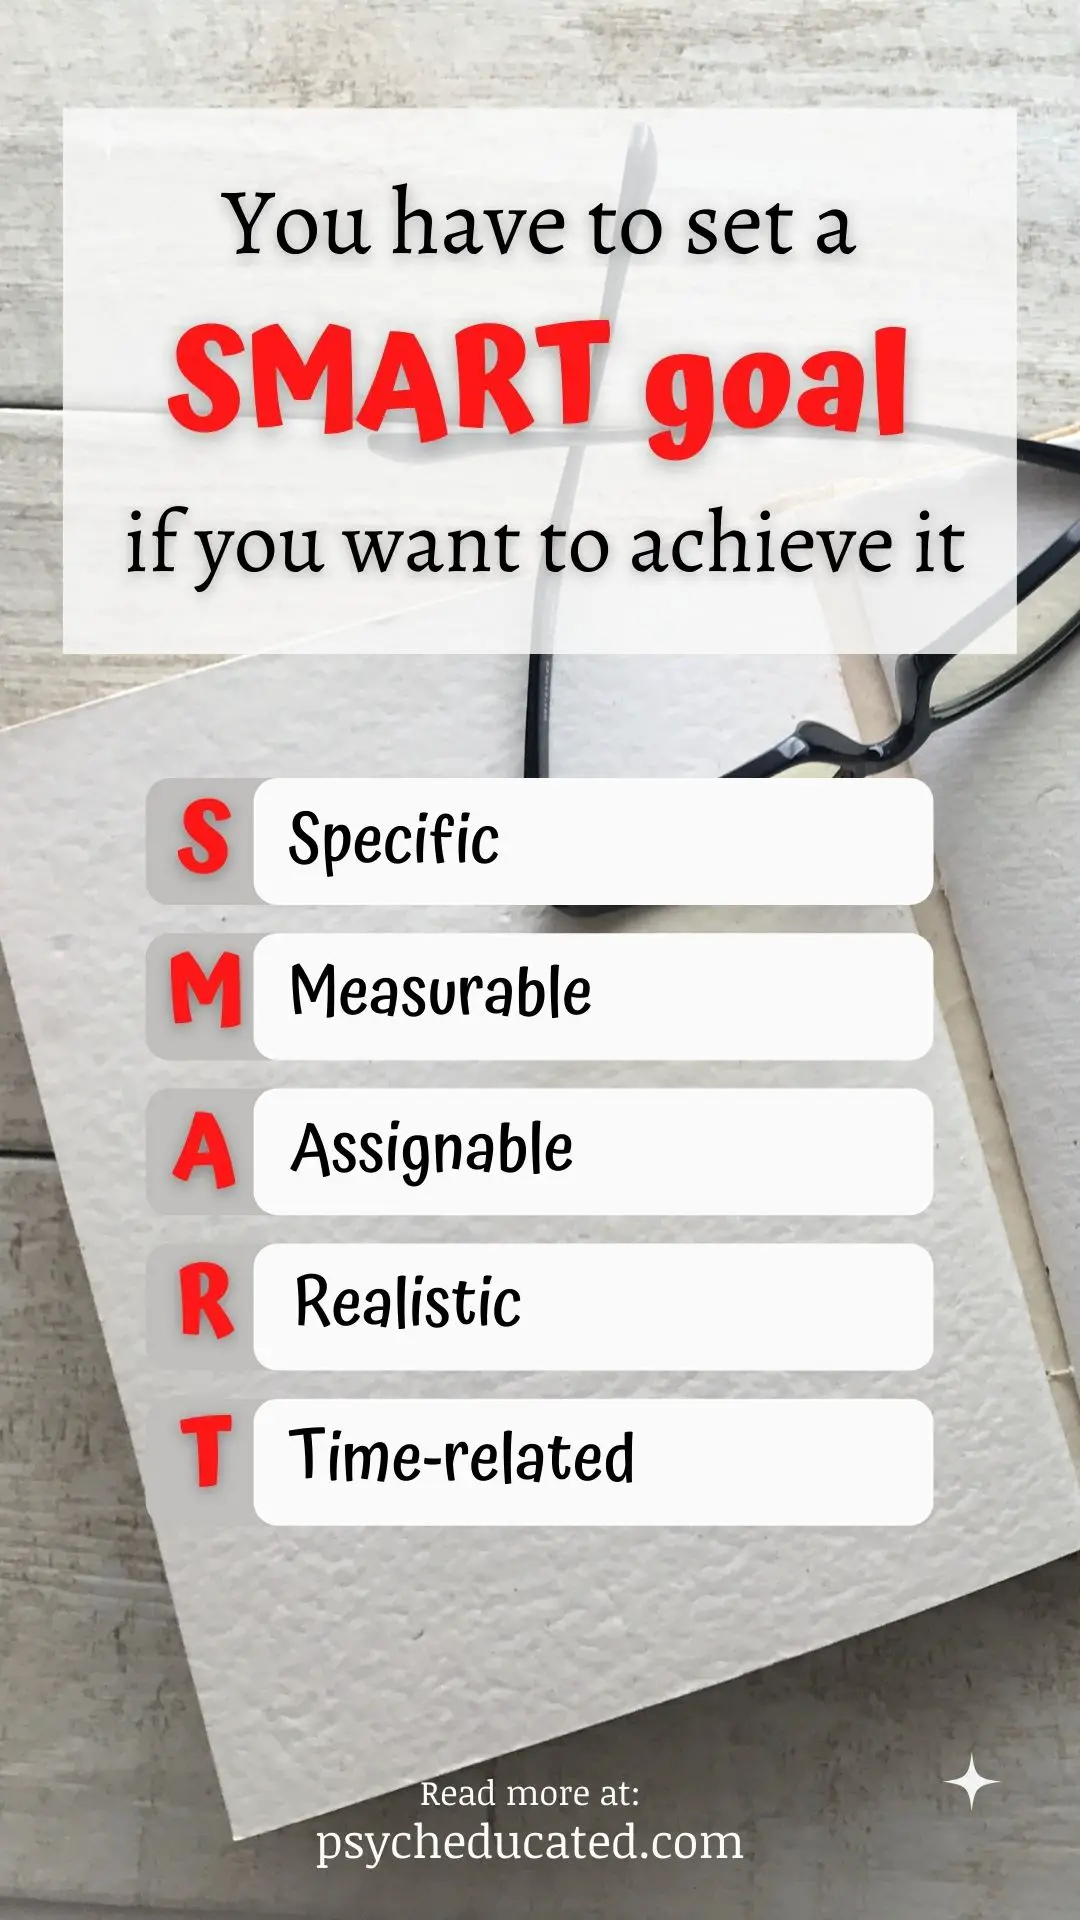 Smart Goal-How to achieve goals